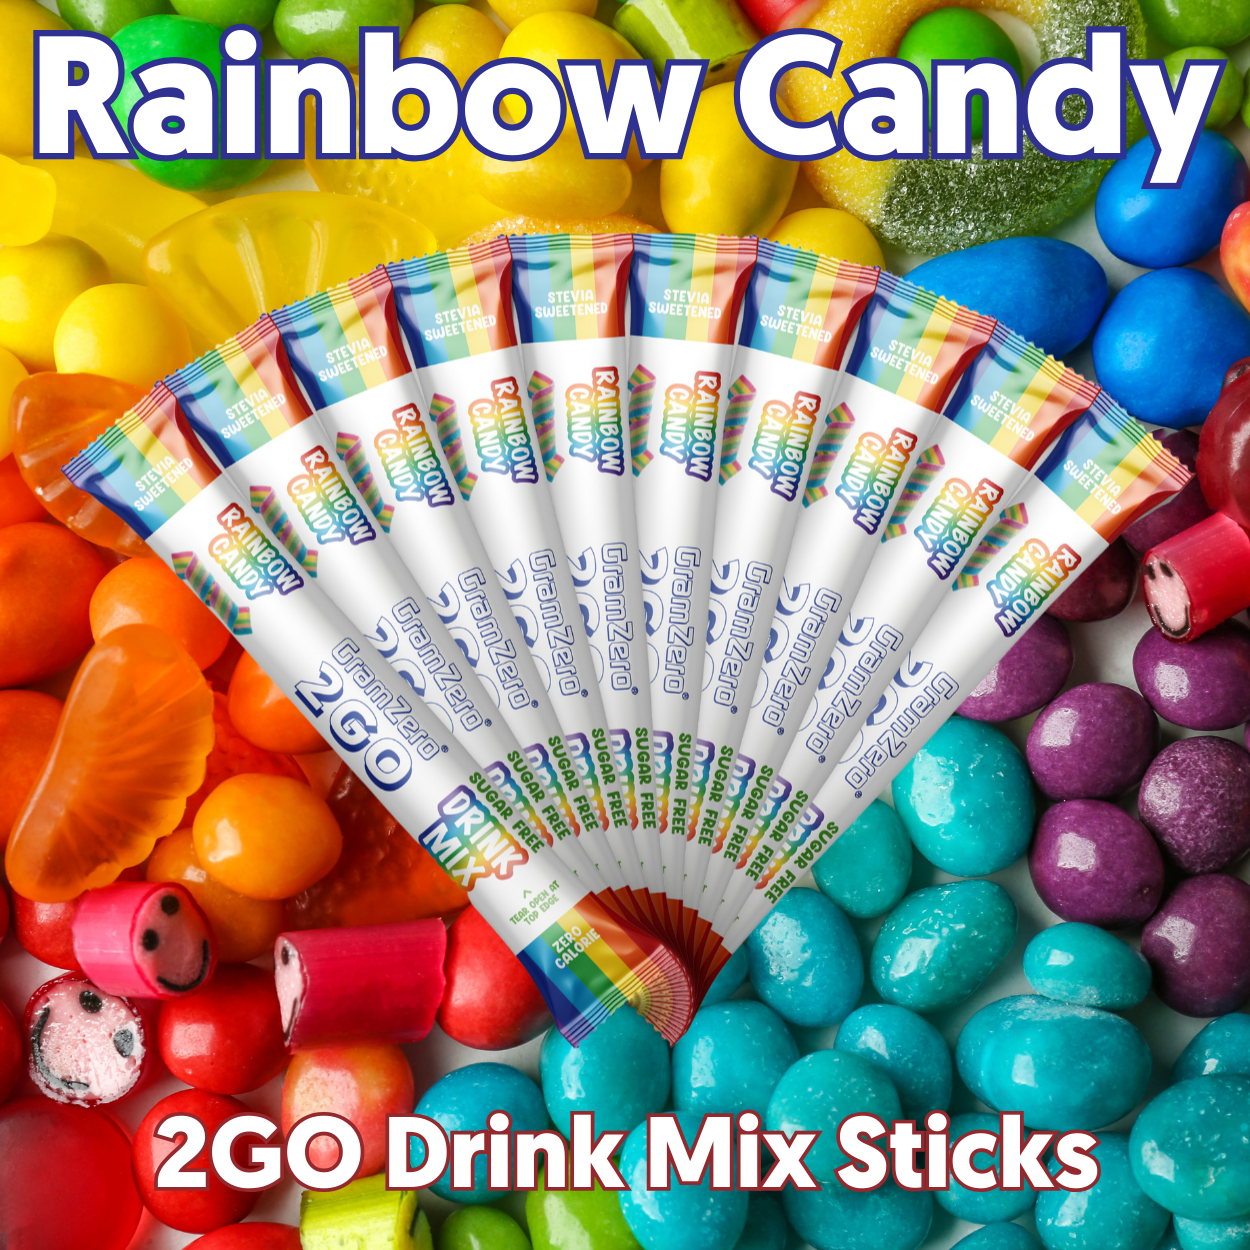 RAINBOW CANDY 2GO Sugar Free Drink Mix Sticks: 10 Pack ~ Great for Loaded Tea Kits